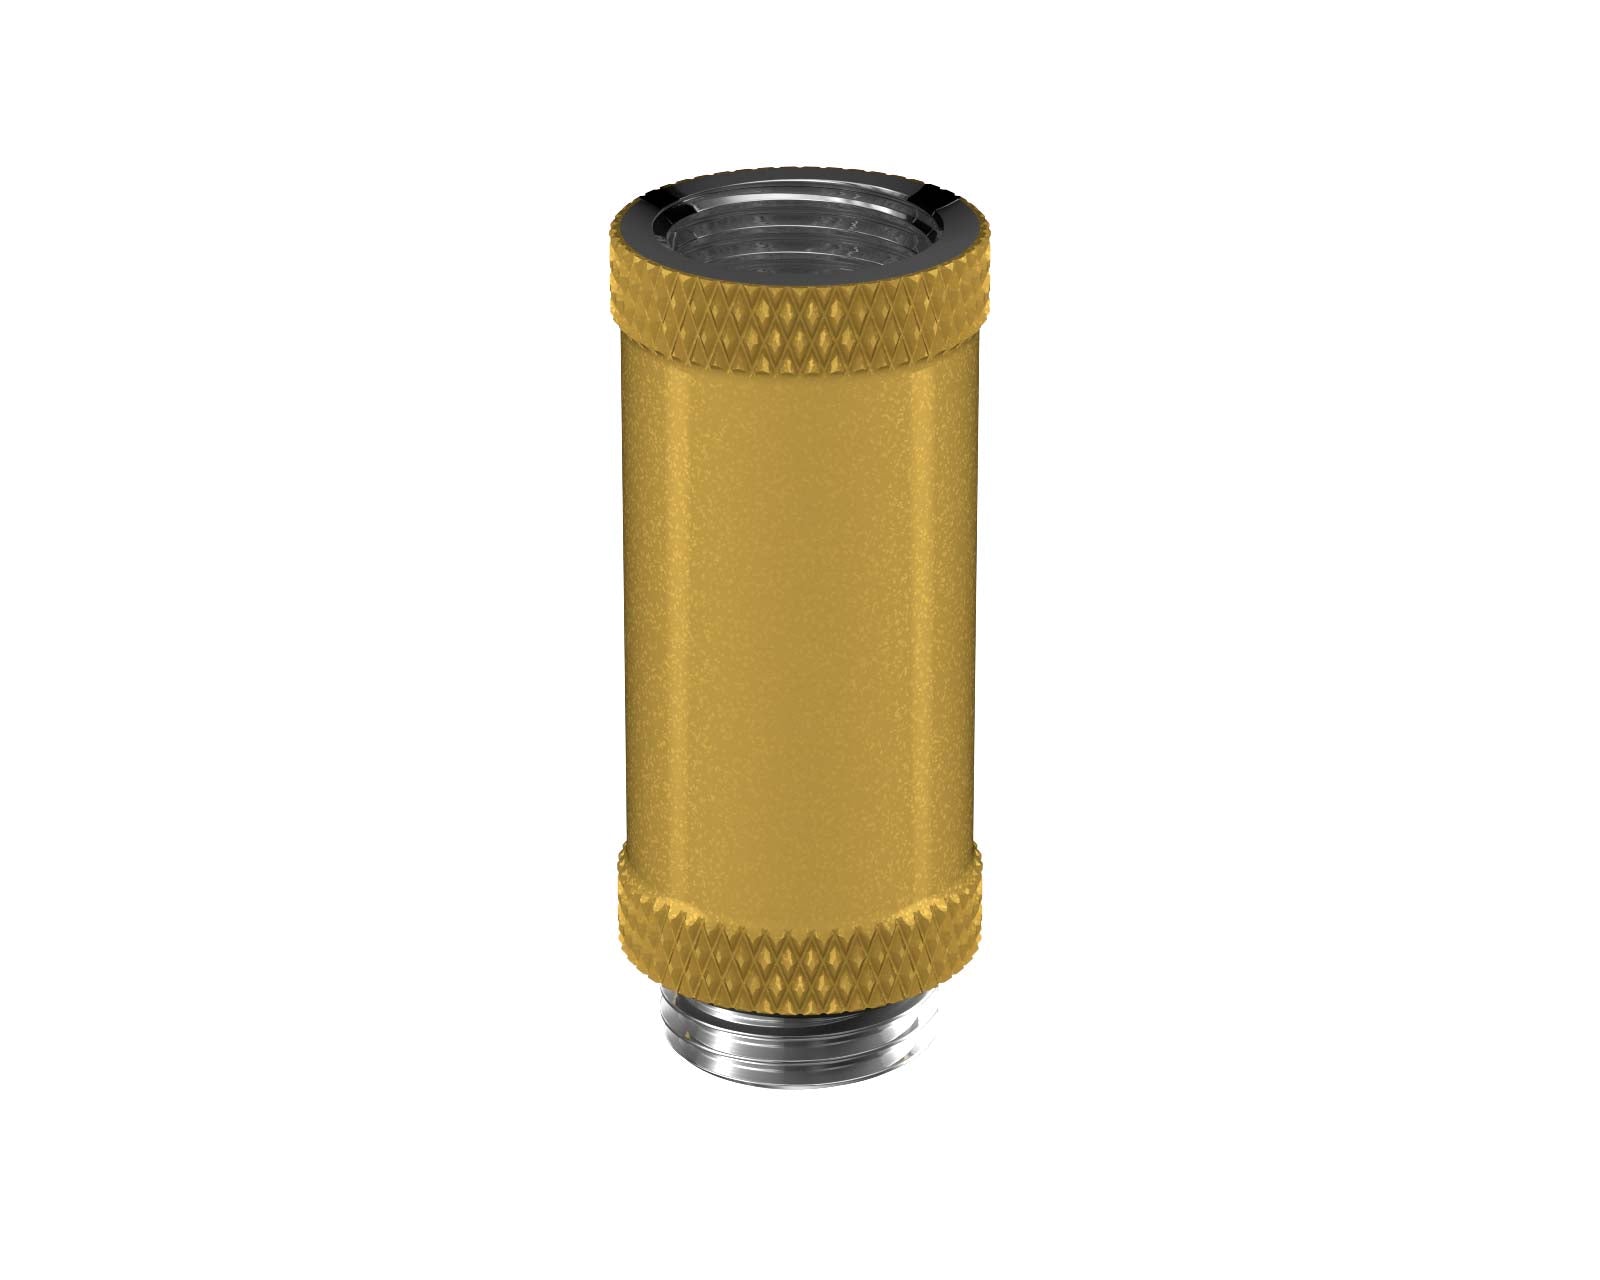 PrimoChill Male to Female G 1/4in. 35mm SX Extension Coupler - PrimoChill - KEEPING IT COOL Gold